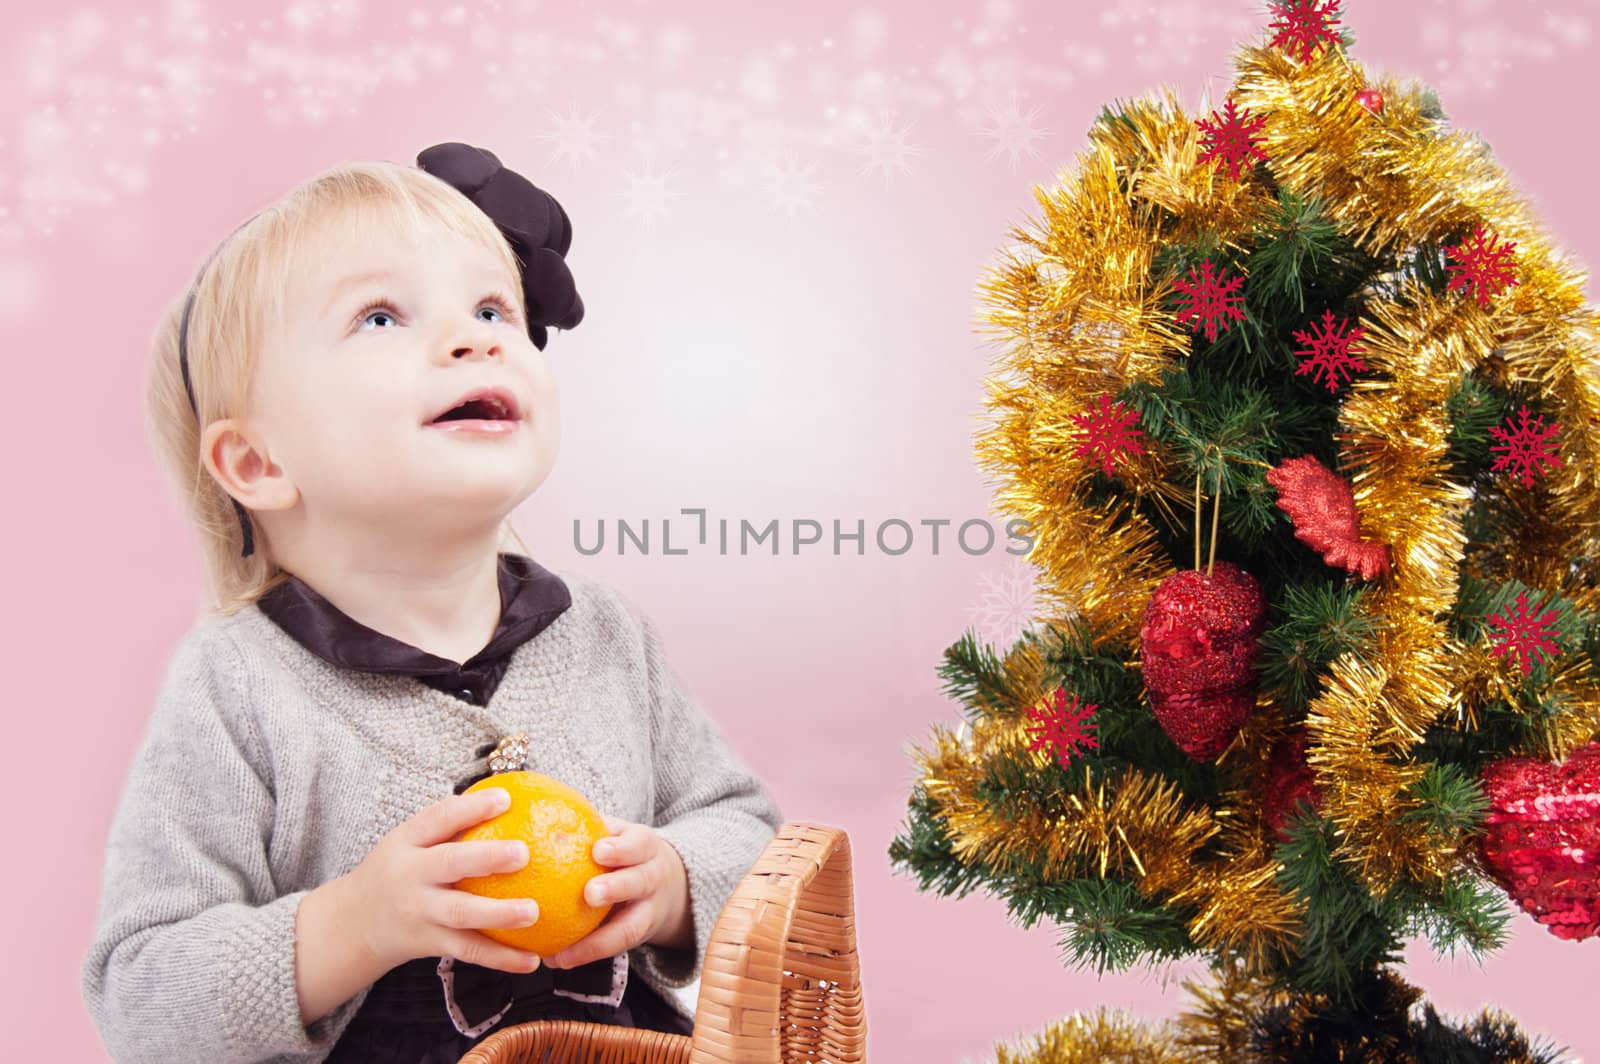 Surprised little girl under Christmas tree by Angel_a